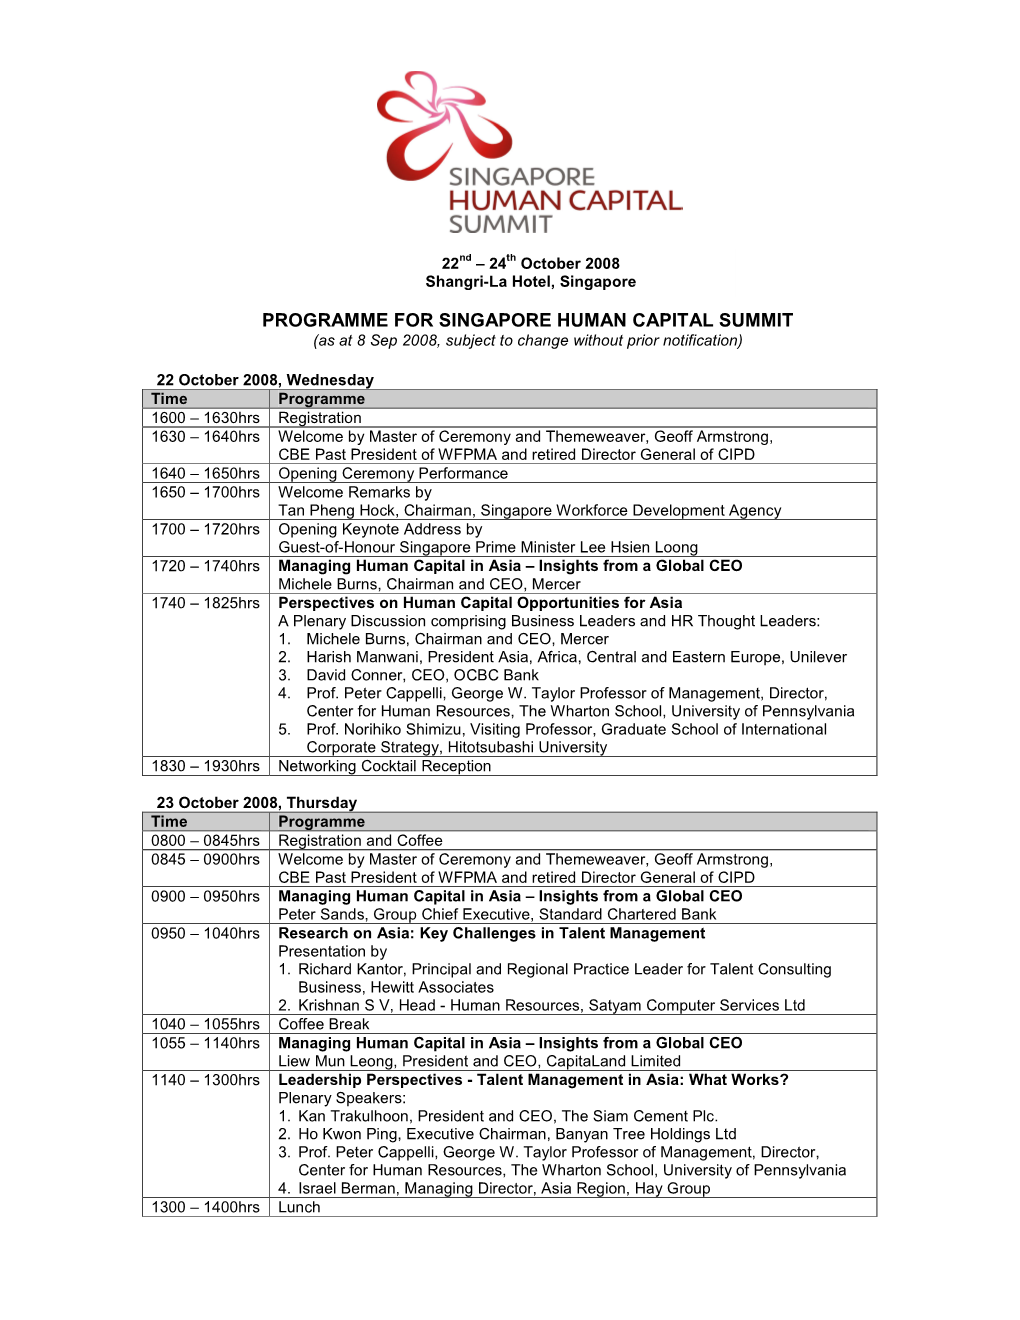 PROGRAMME for SINGAPORE HUMAN CAPITAL SUMMIT (As at 8 Sep 2008, Subject to Change Without Prior Notification)